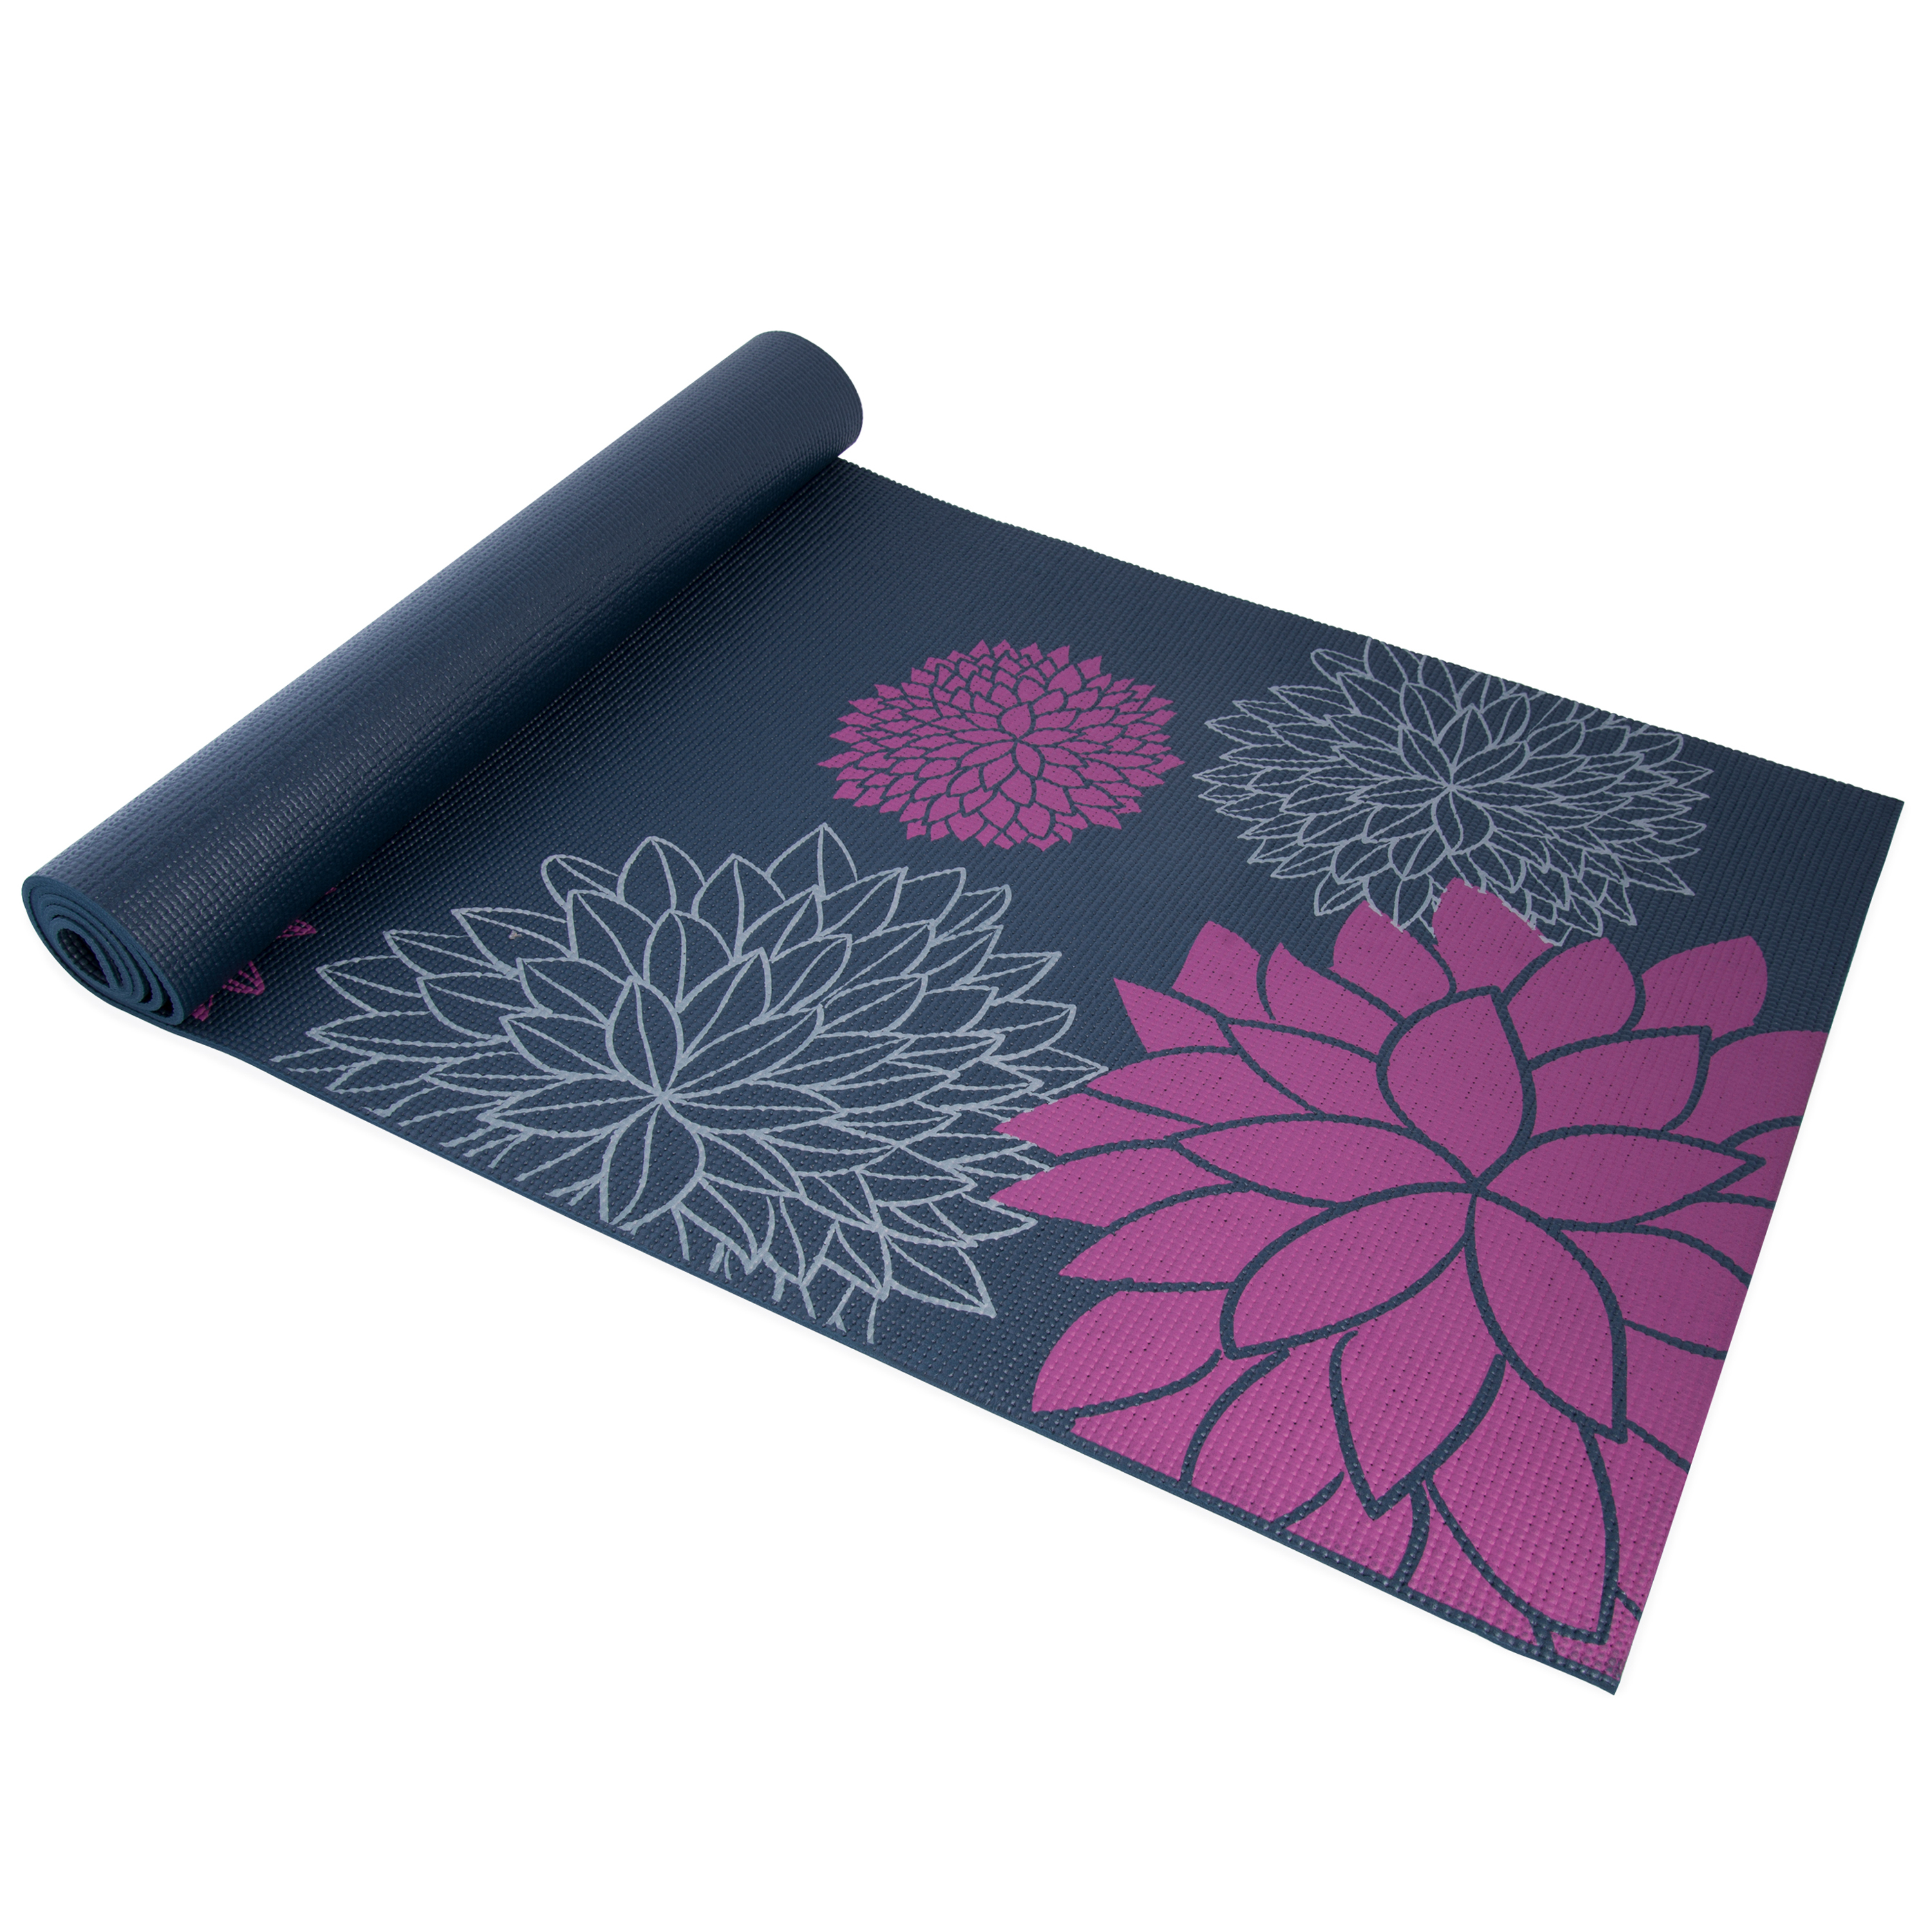 CAP 5mm Yoga Mat with Carry Strap, Dahlia - image 1 of 4